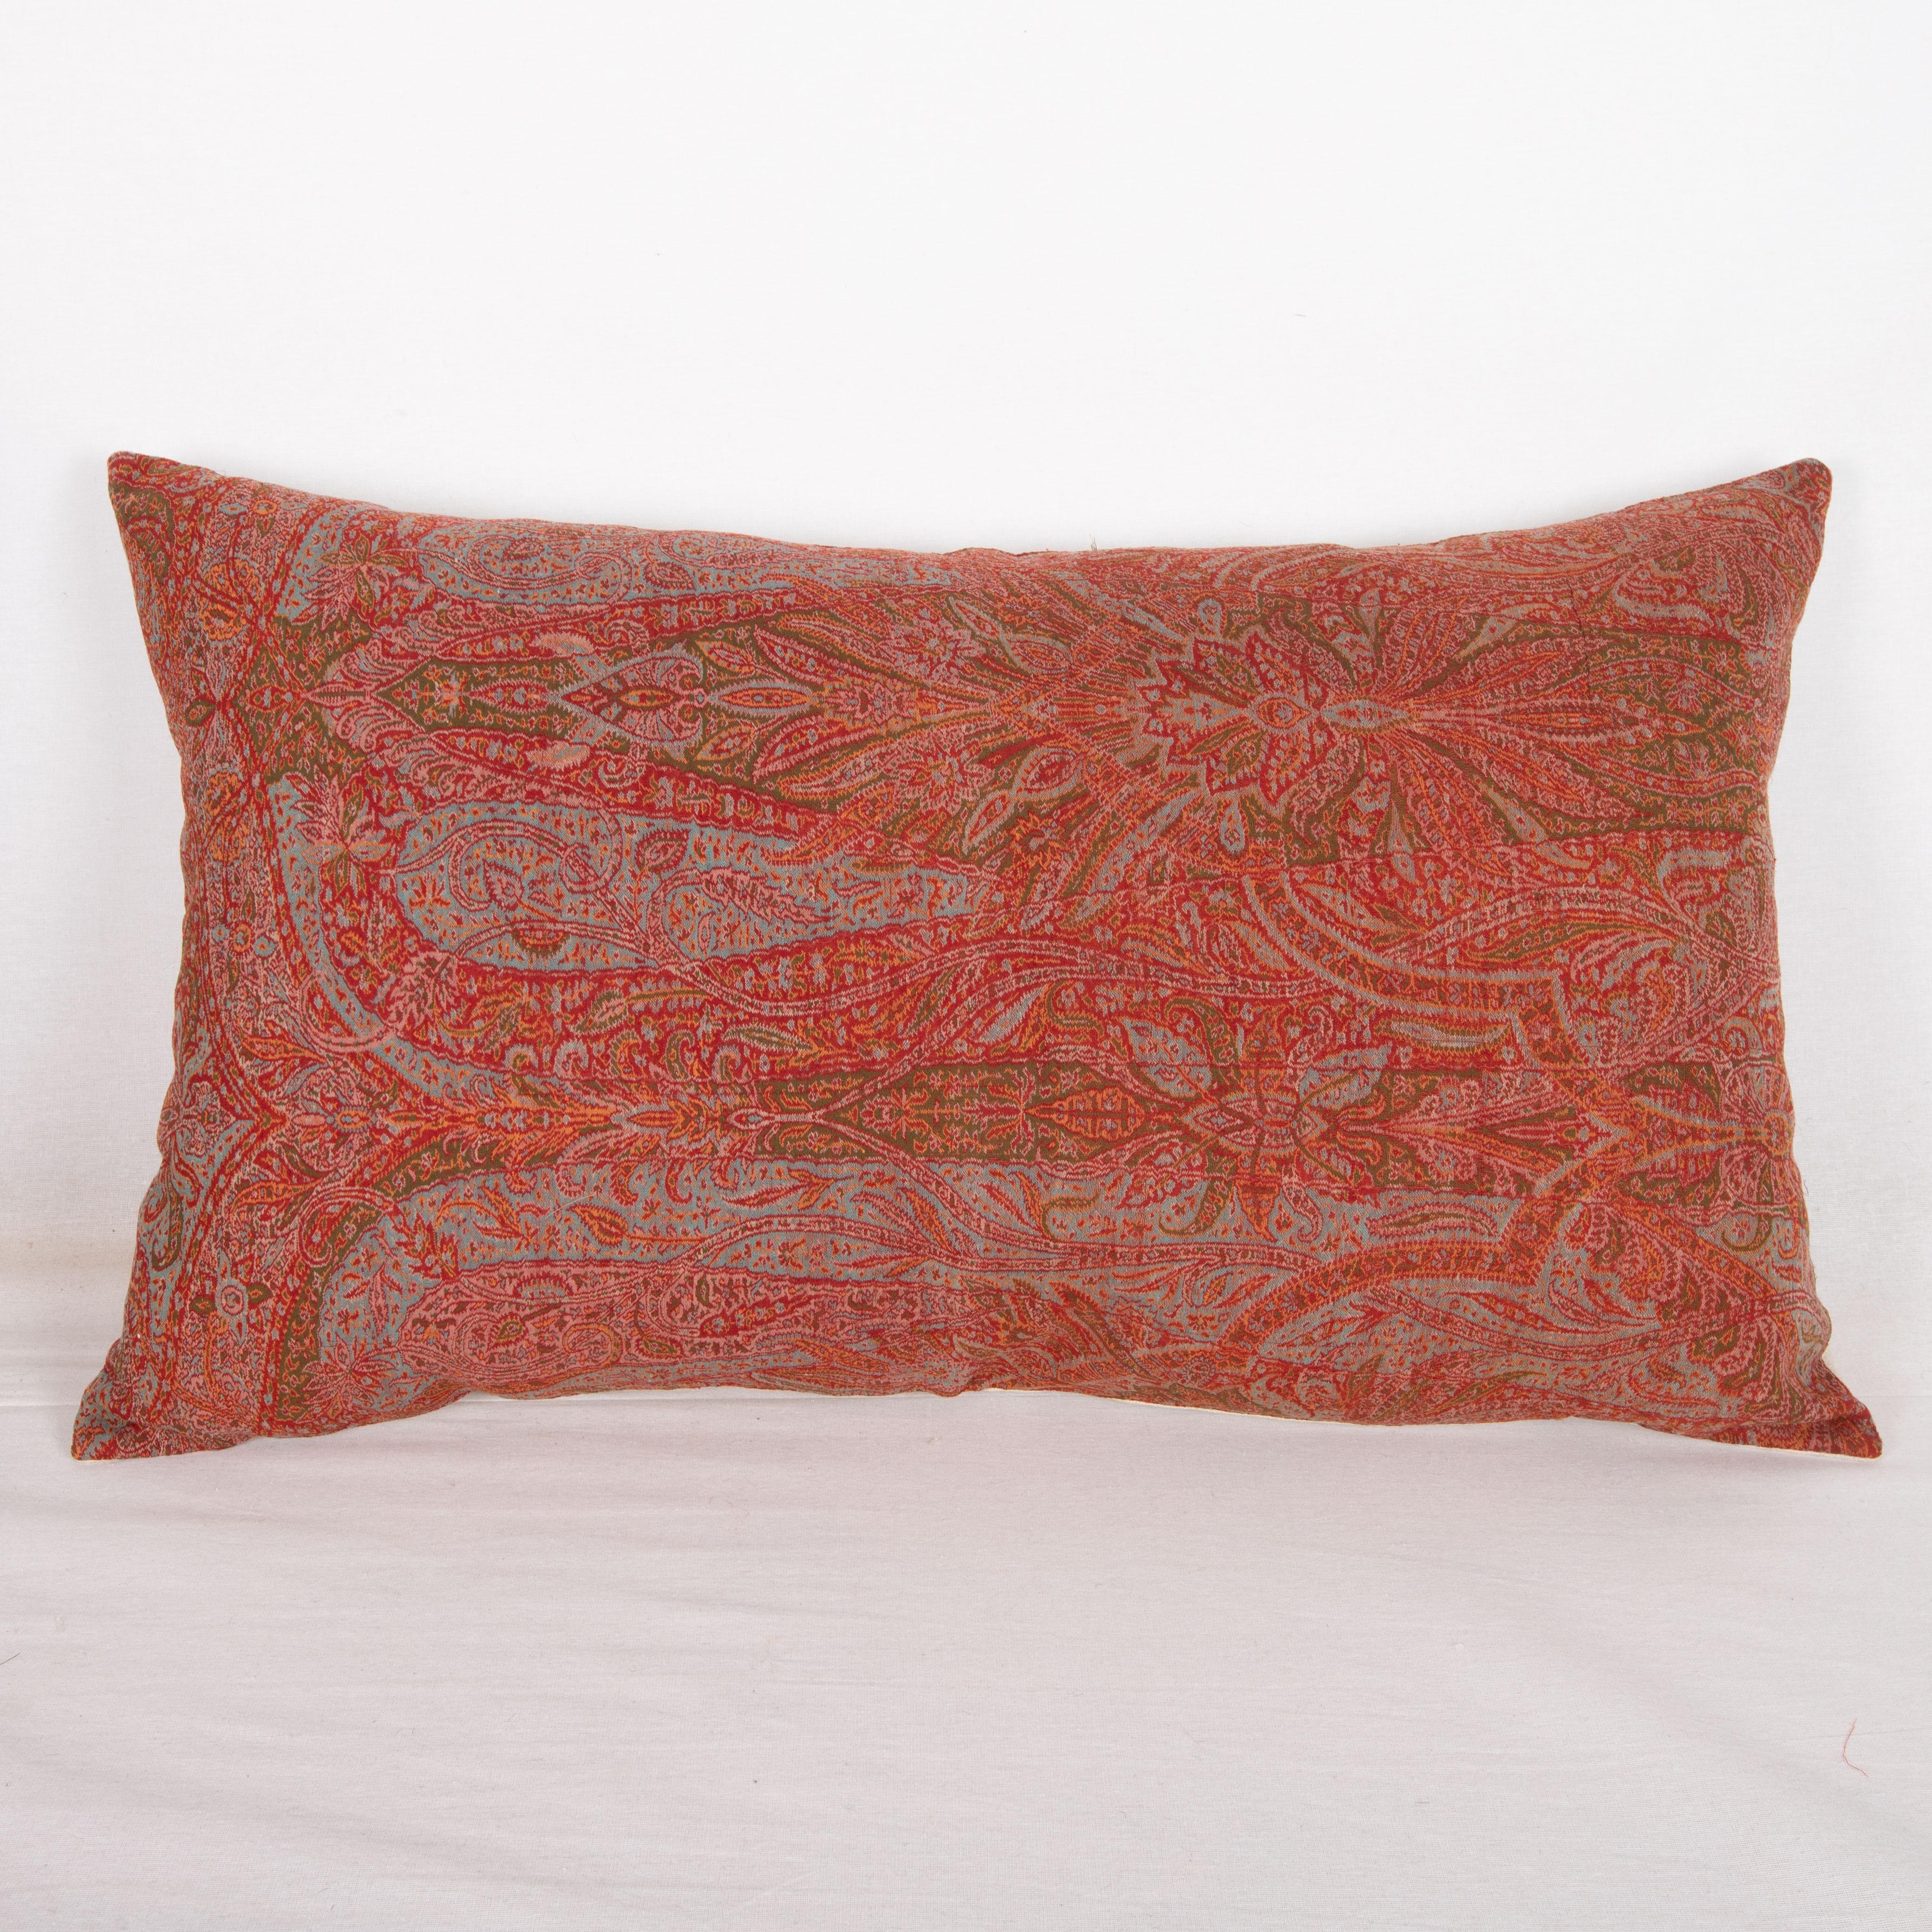 Antique Paisley pillow cover made from a European wool Paisley Sshawl, late 19th /early 20th century
It does not come with an insert.
Linen in the back.
Zipper closure.
Dry. Cleaning is reccommeded.

Antique European Paisley shawls are a type